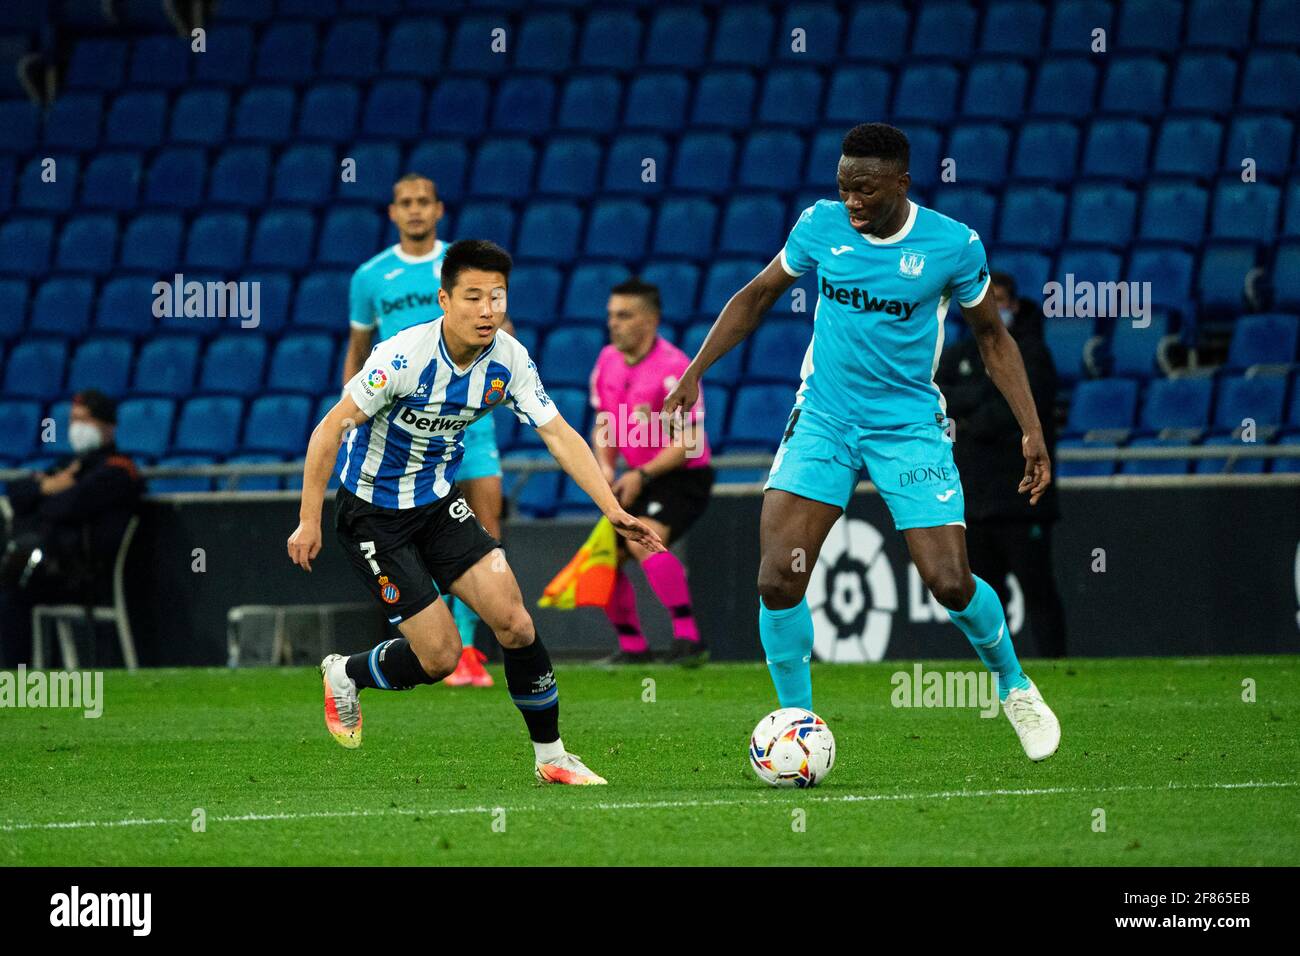 Cornella, Spain. 11th Apr, 2021. RCD Espanyol's Wu Lei (L) vies with Leganes' Kenneth Omeruo during a Spanish second division league football match between RCD Espanyol and CD Leganes in Cornella, Spain, April 11, 2021. Credit: Joan Gosa/Xinhua/Alamy Live News Stock Photo